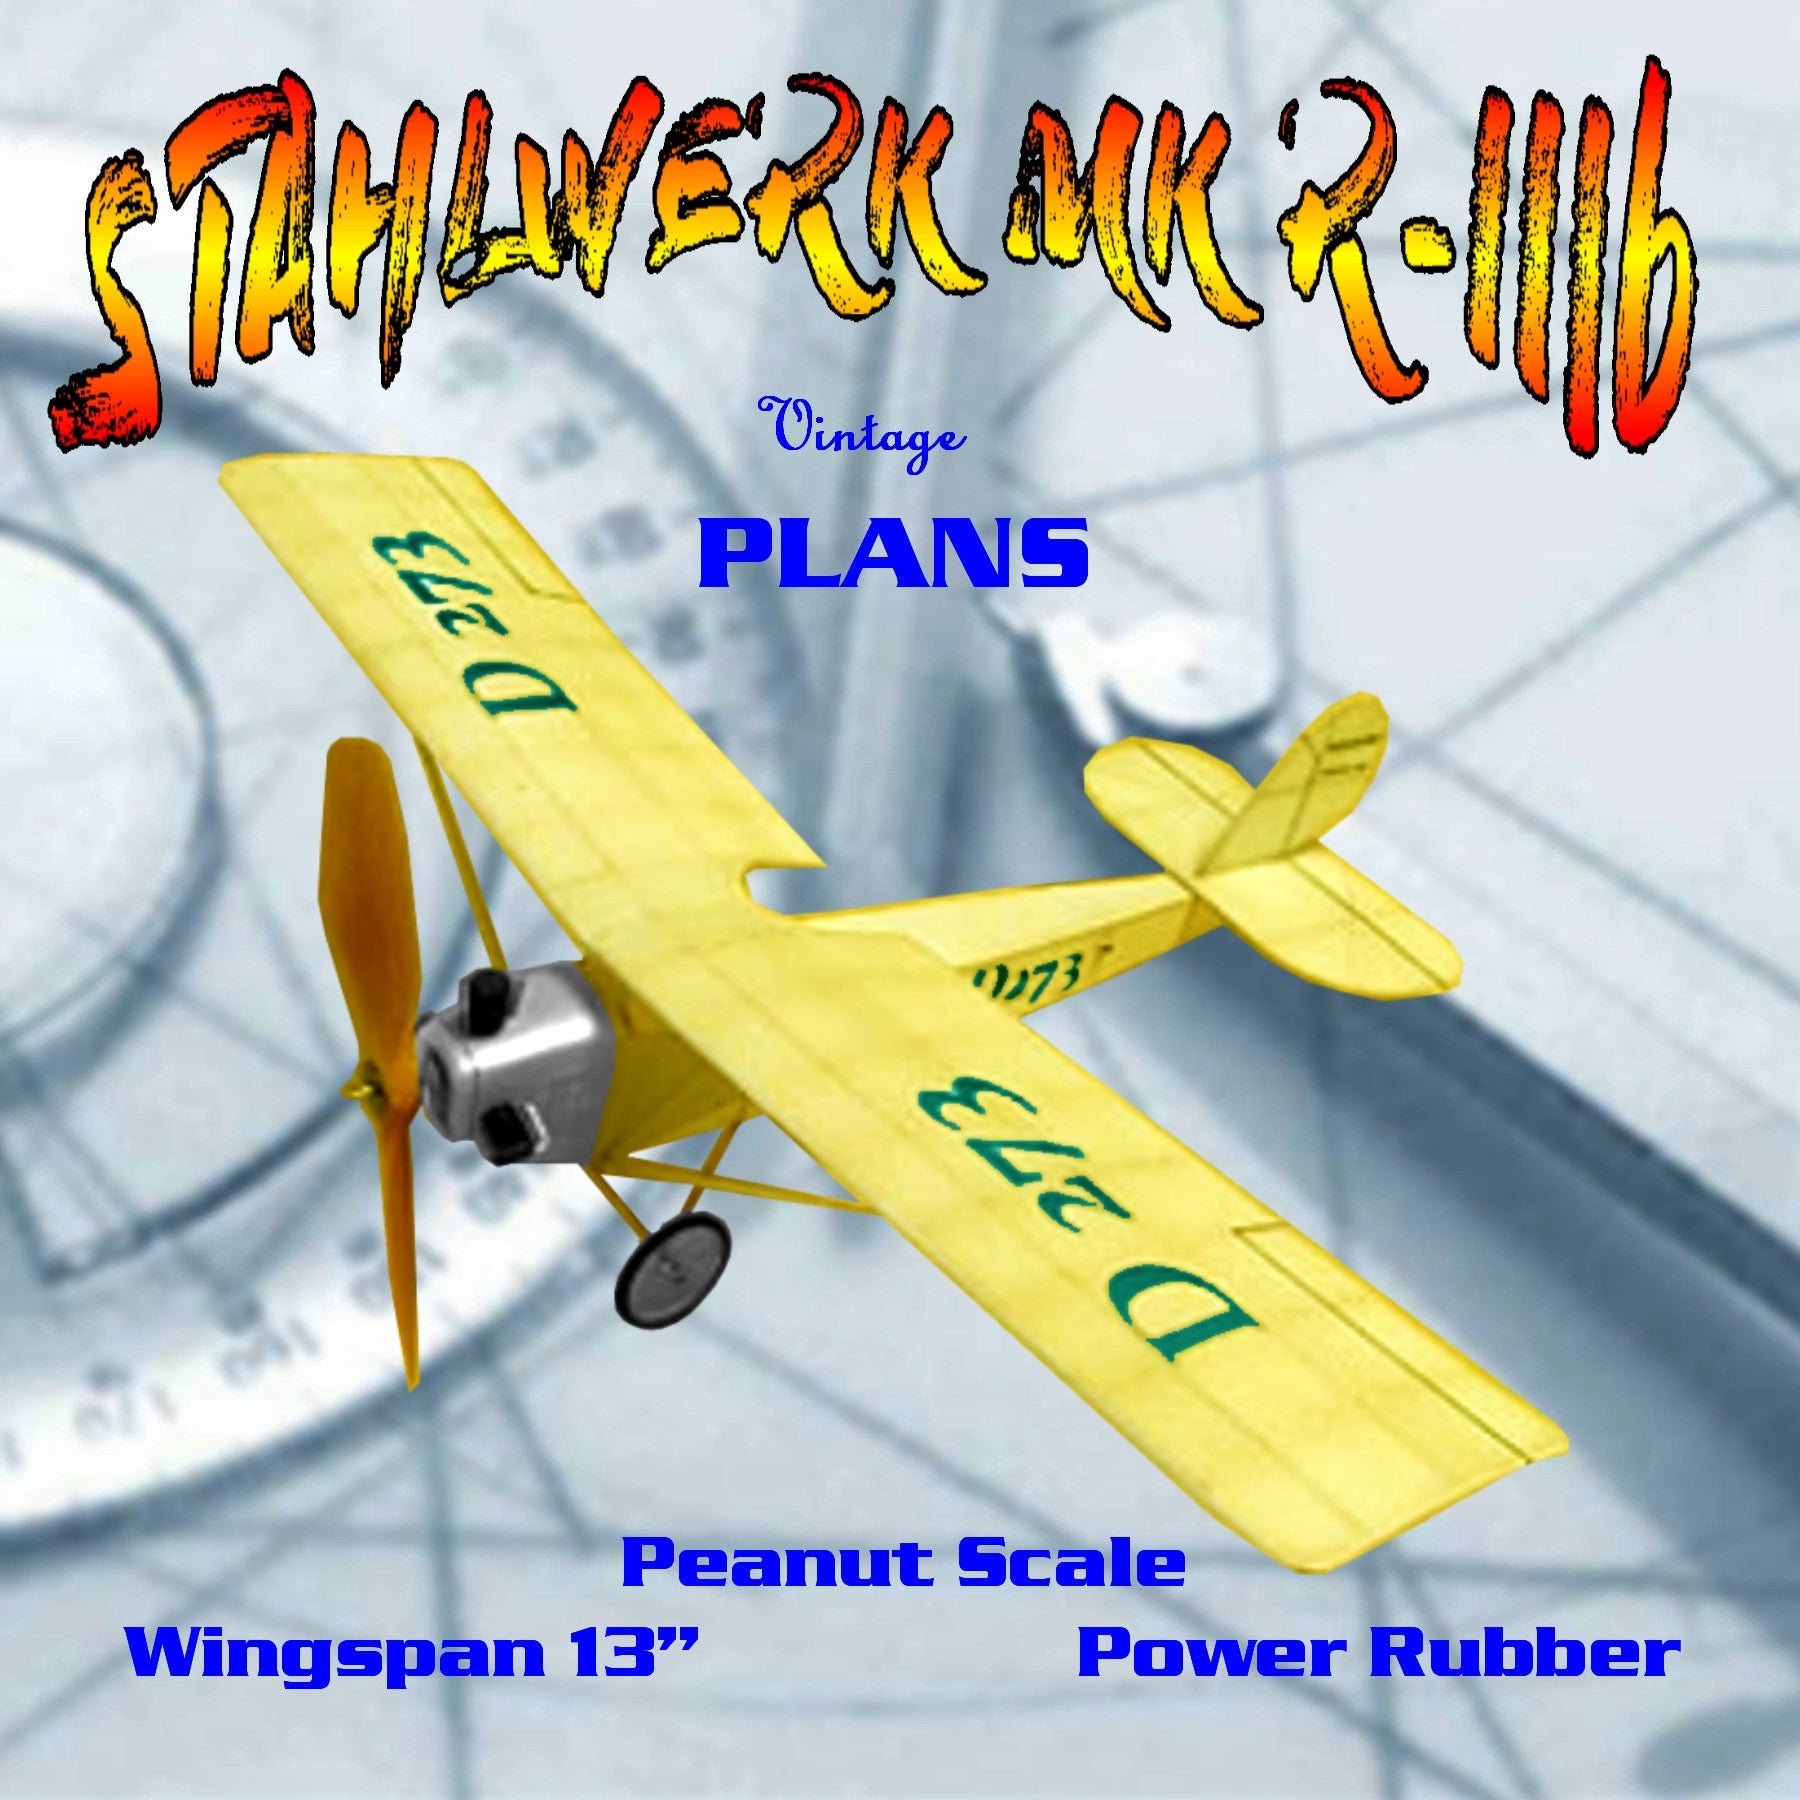 full size printed plans peanut scale 13" & 15" "stahlwerk mk r-iiib"  it's a natural for flying scale.